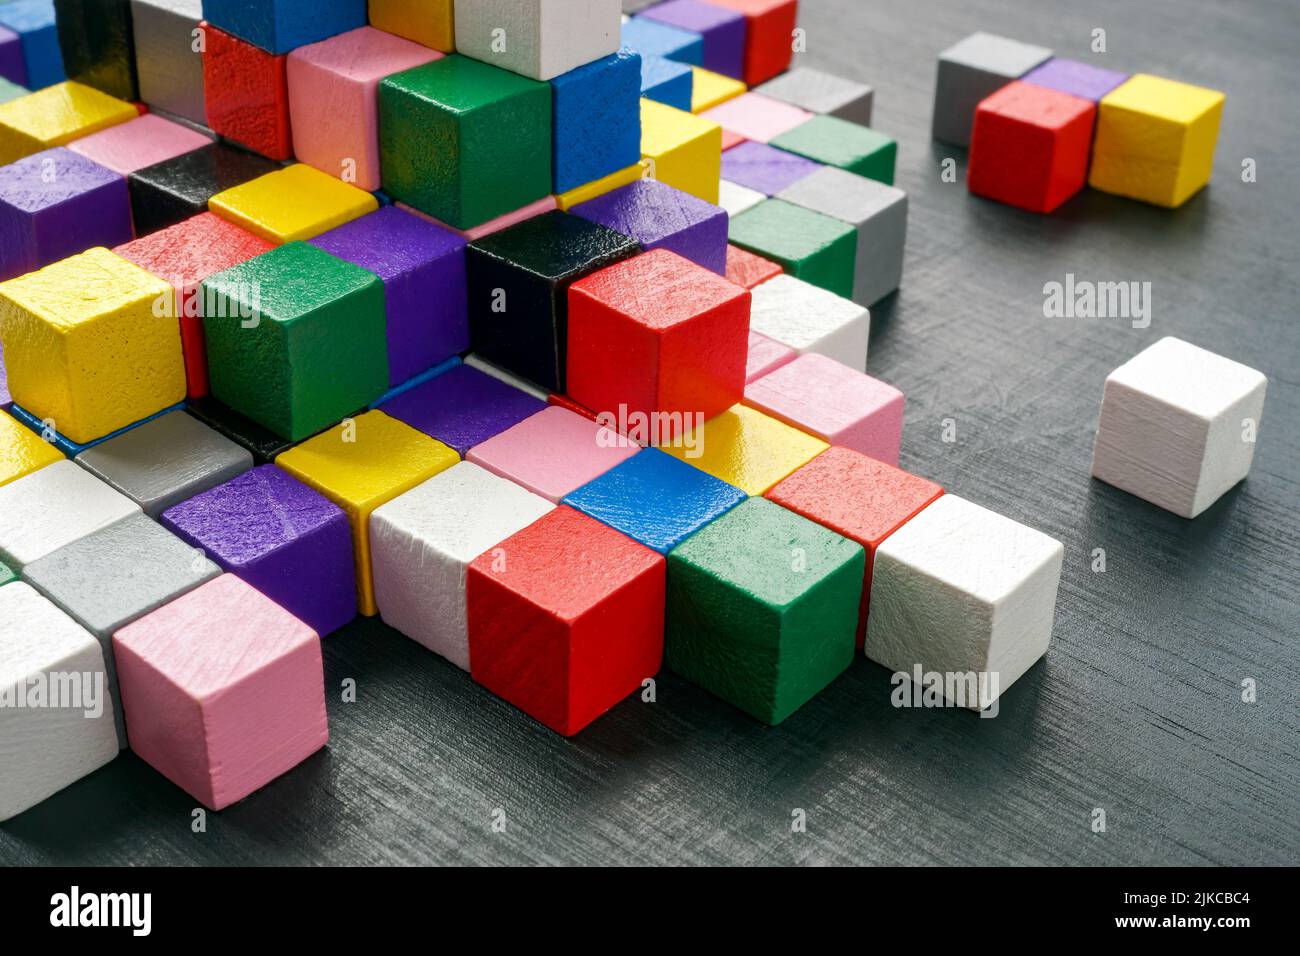 Colorful blocks as an abstract symbol of complex structure, interaction and diversity. Stock Photo